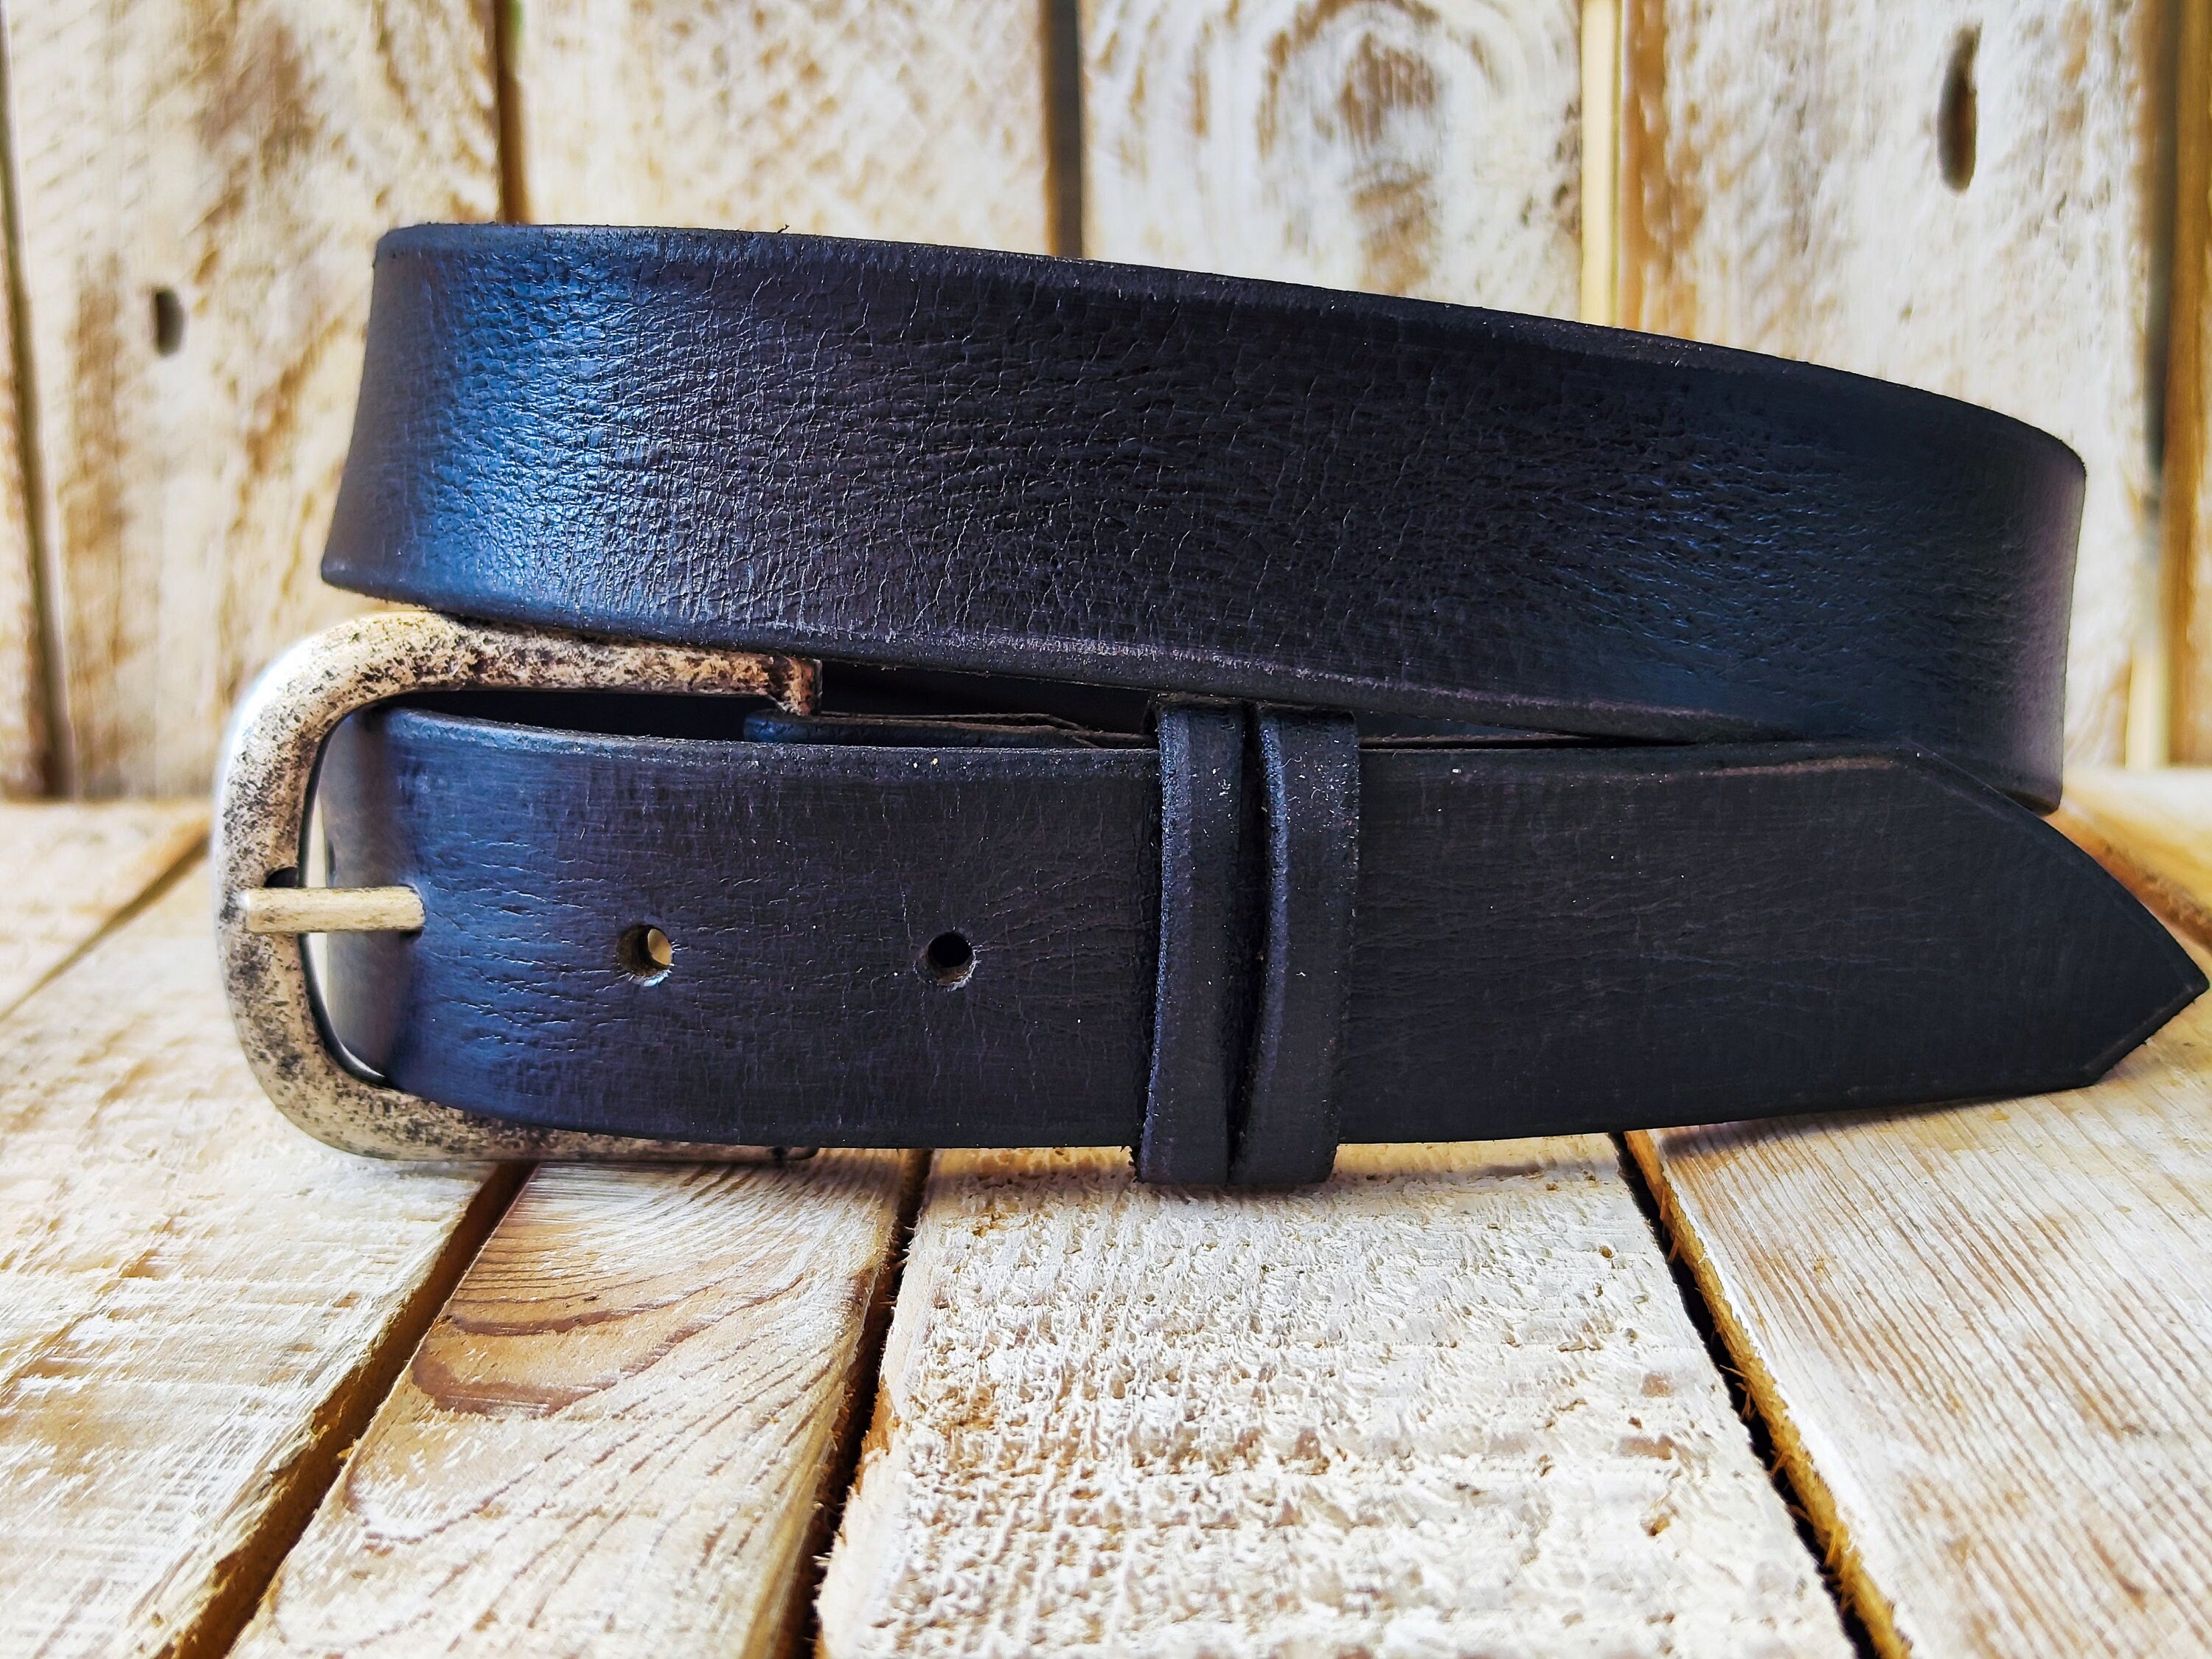 Black Leather  Men's belt silver buckle,the option to print a name makes this vintage belt the perfect gift for a dad, boyfriend and any man